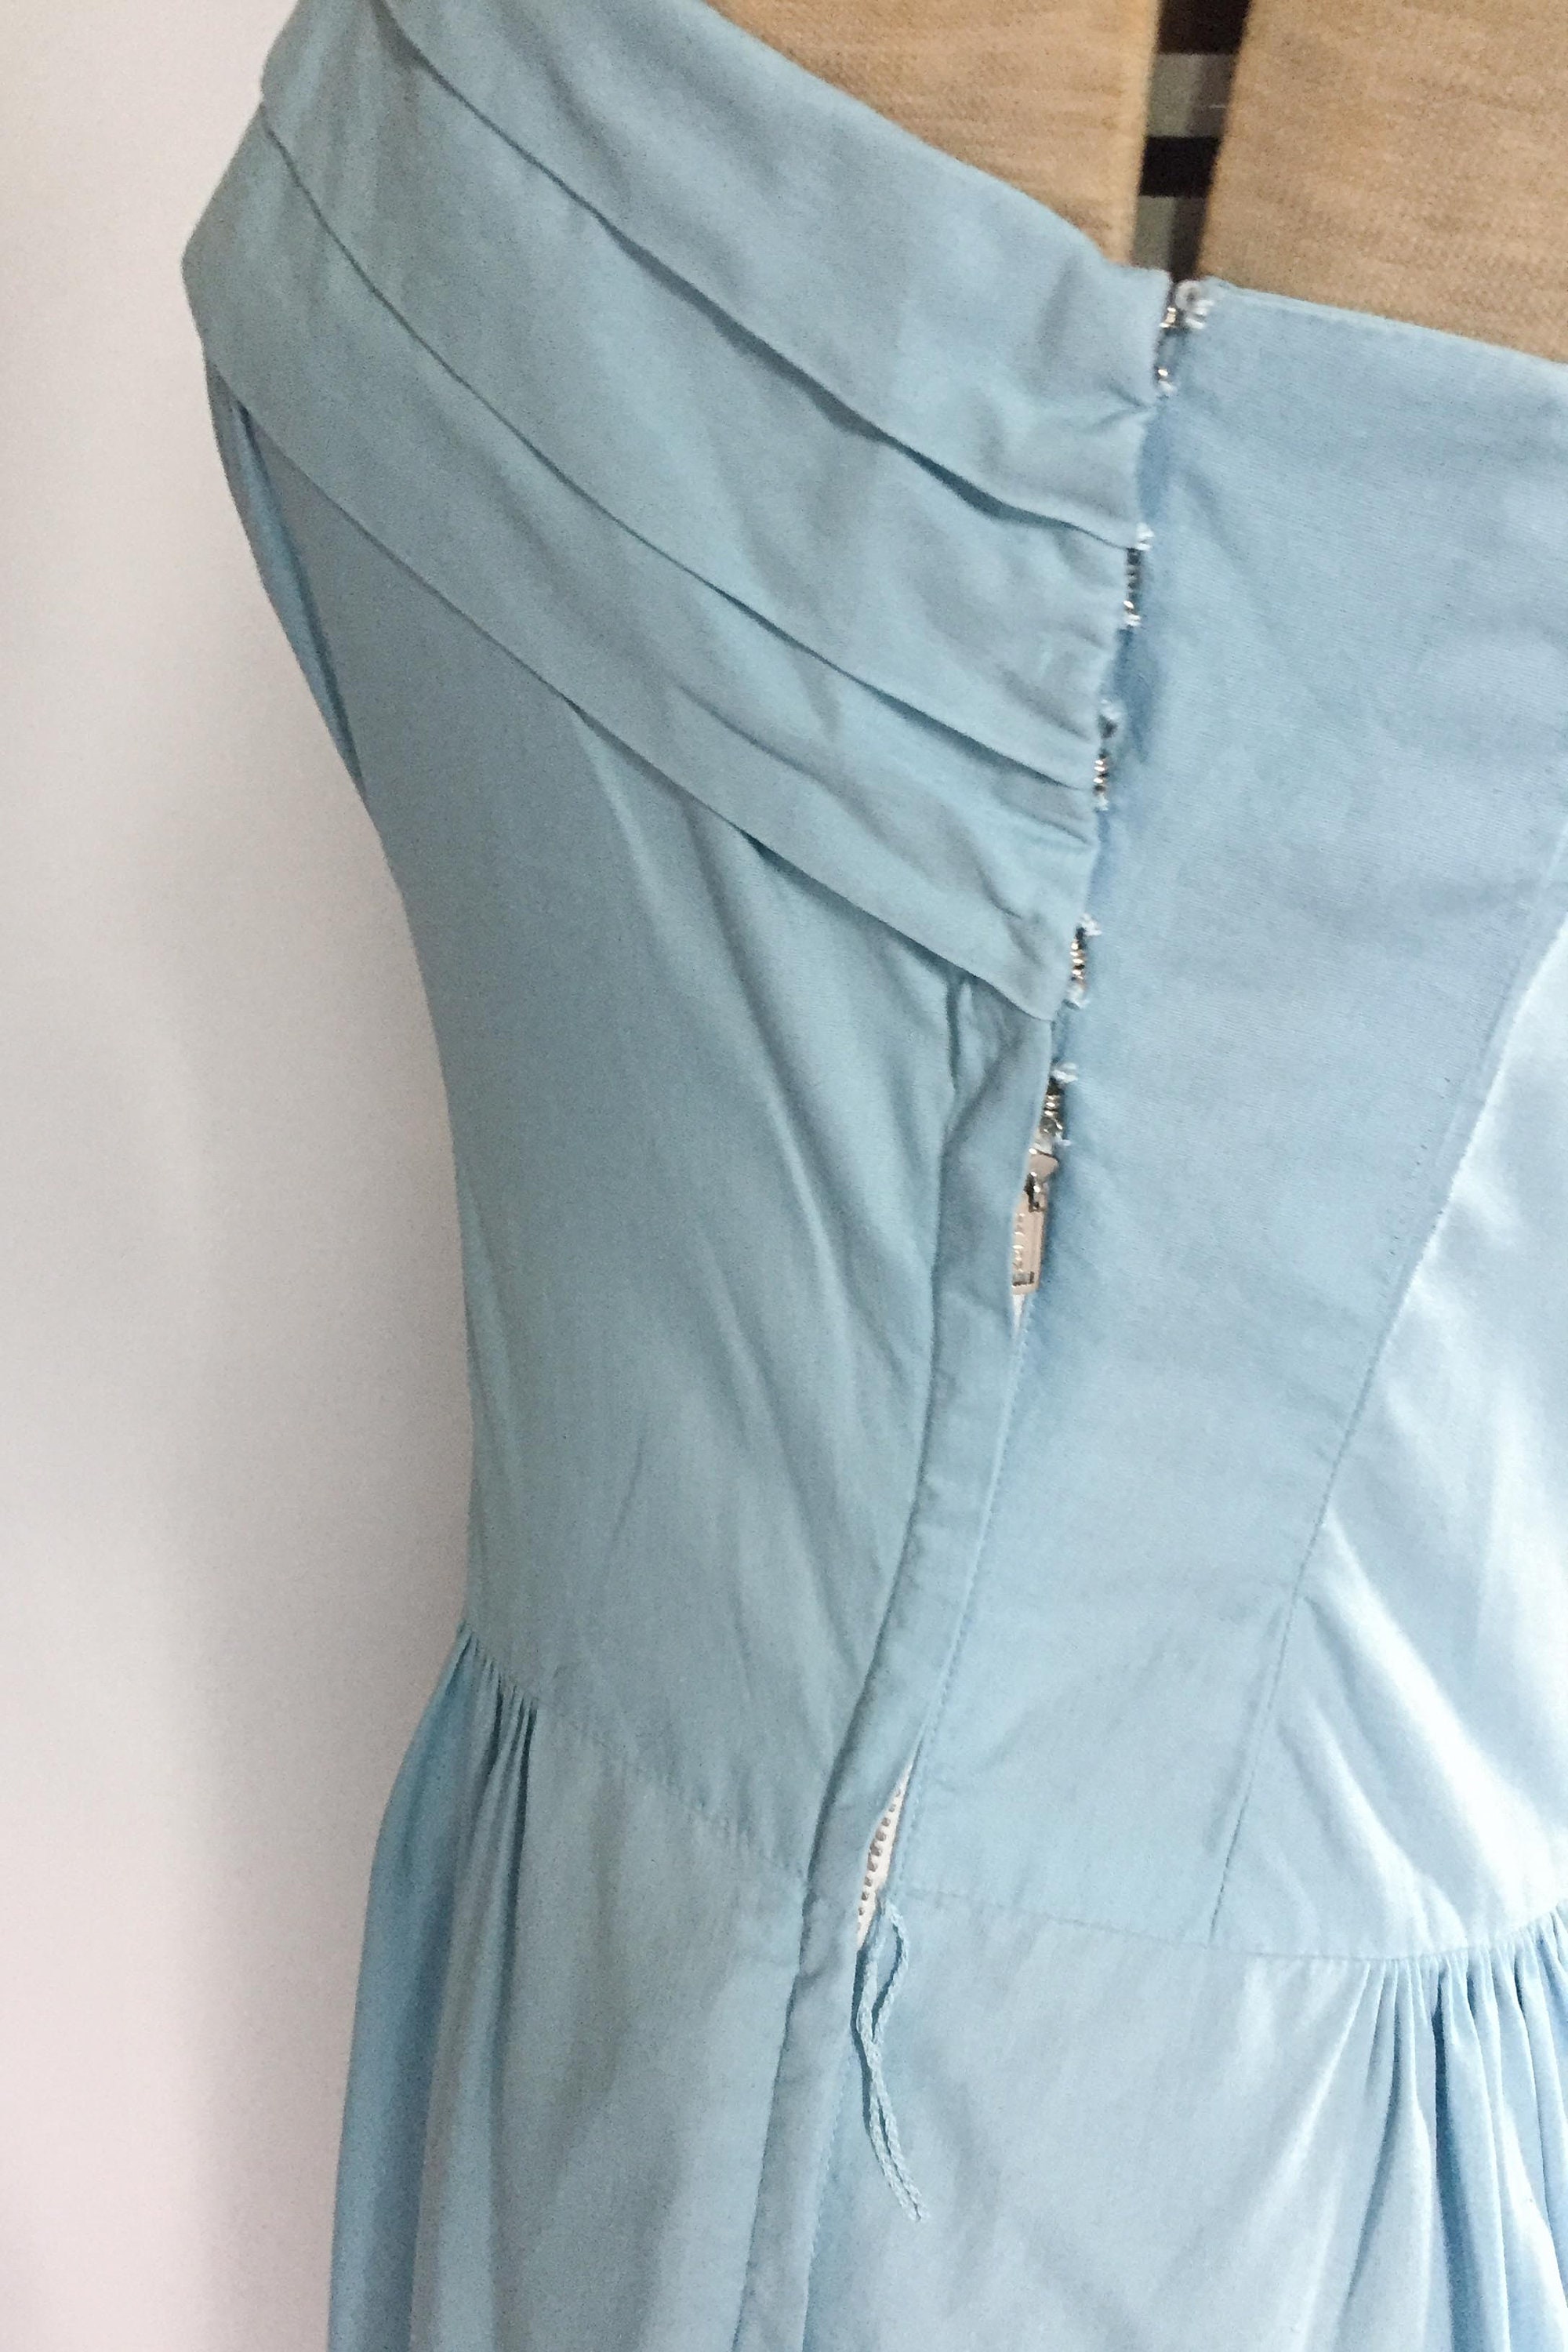 Vintage 1940s dress / 40s dress / baby blue collared pleated sleeveless ...